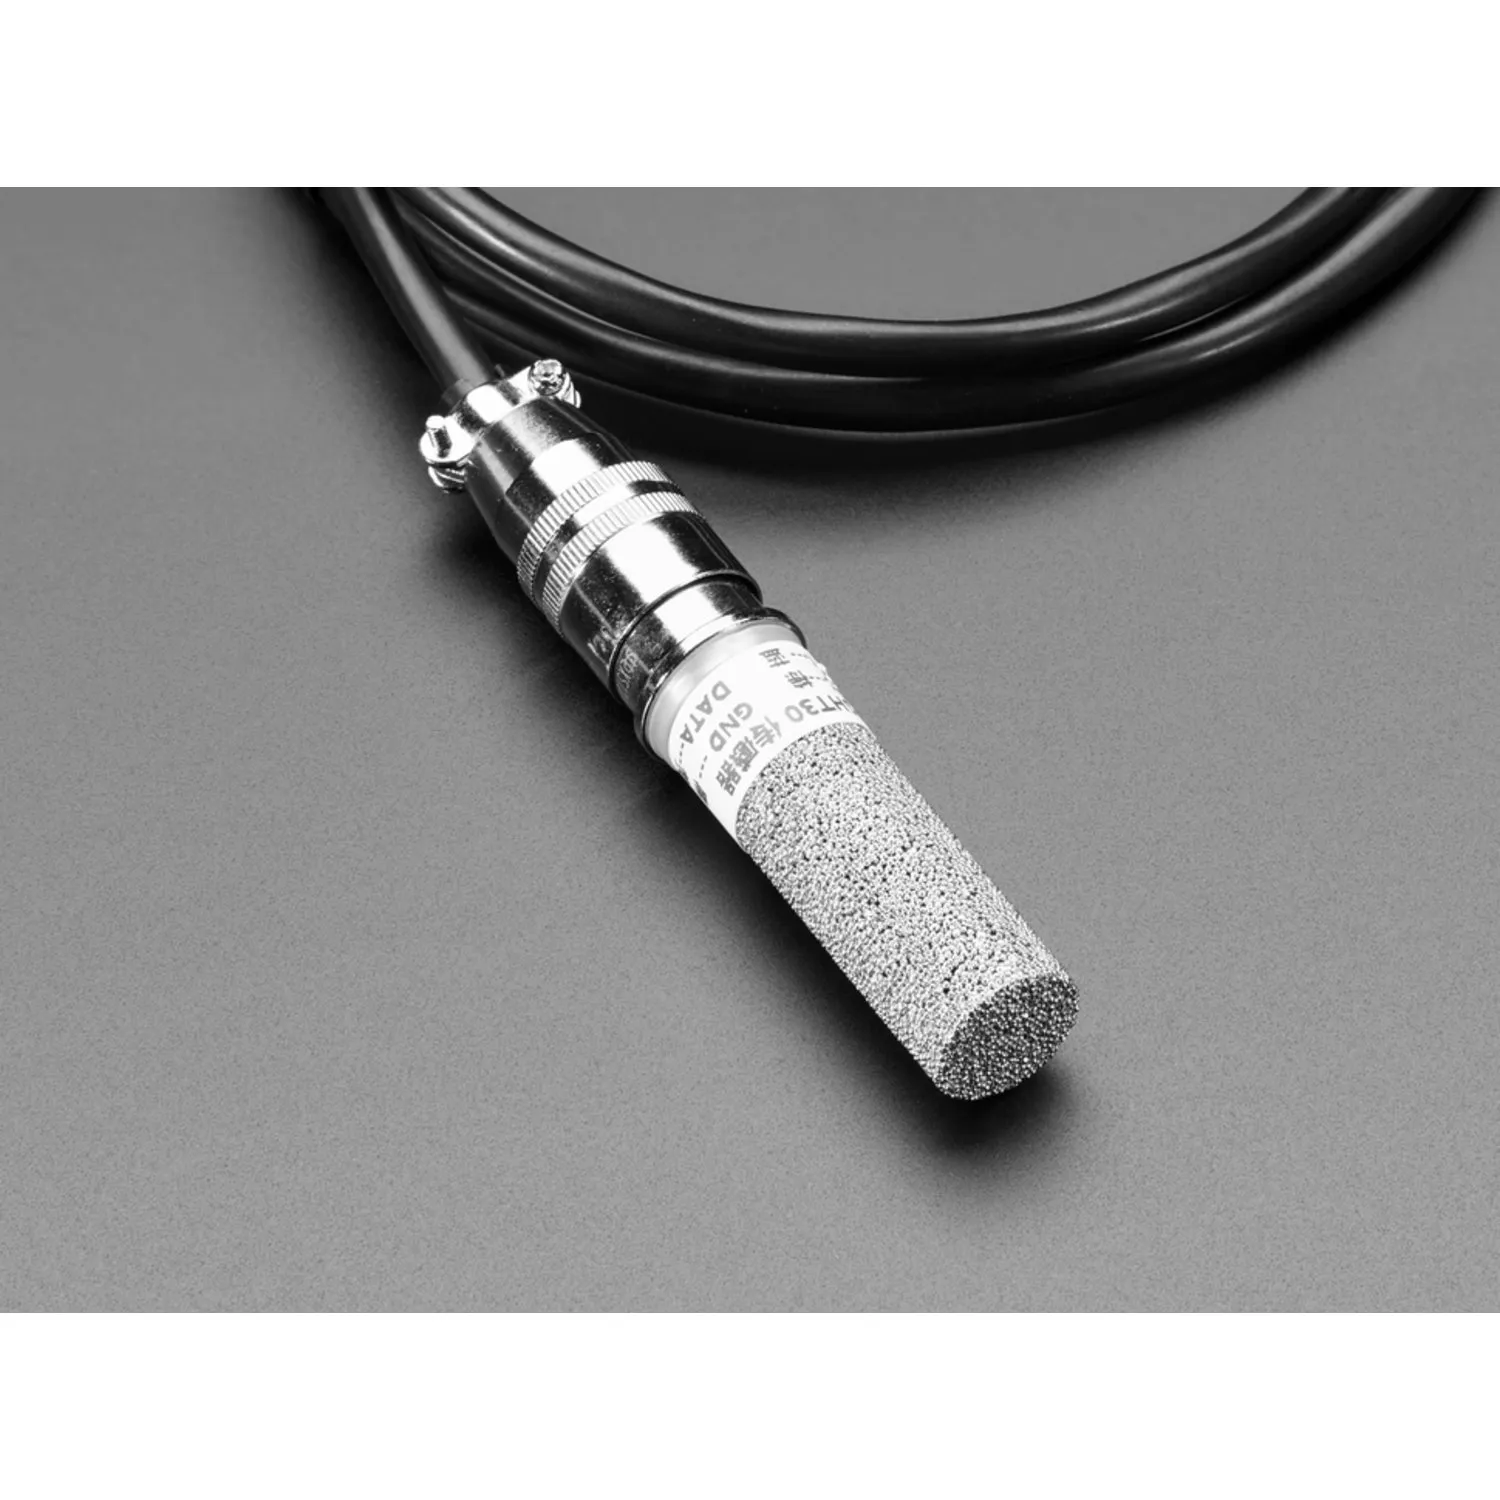 Photo of SHT-30 Mesh-protected Weather-proof Temperature/Humidity Sensor - 1M Cable